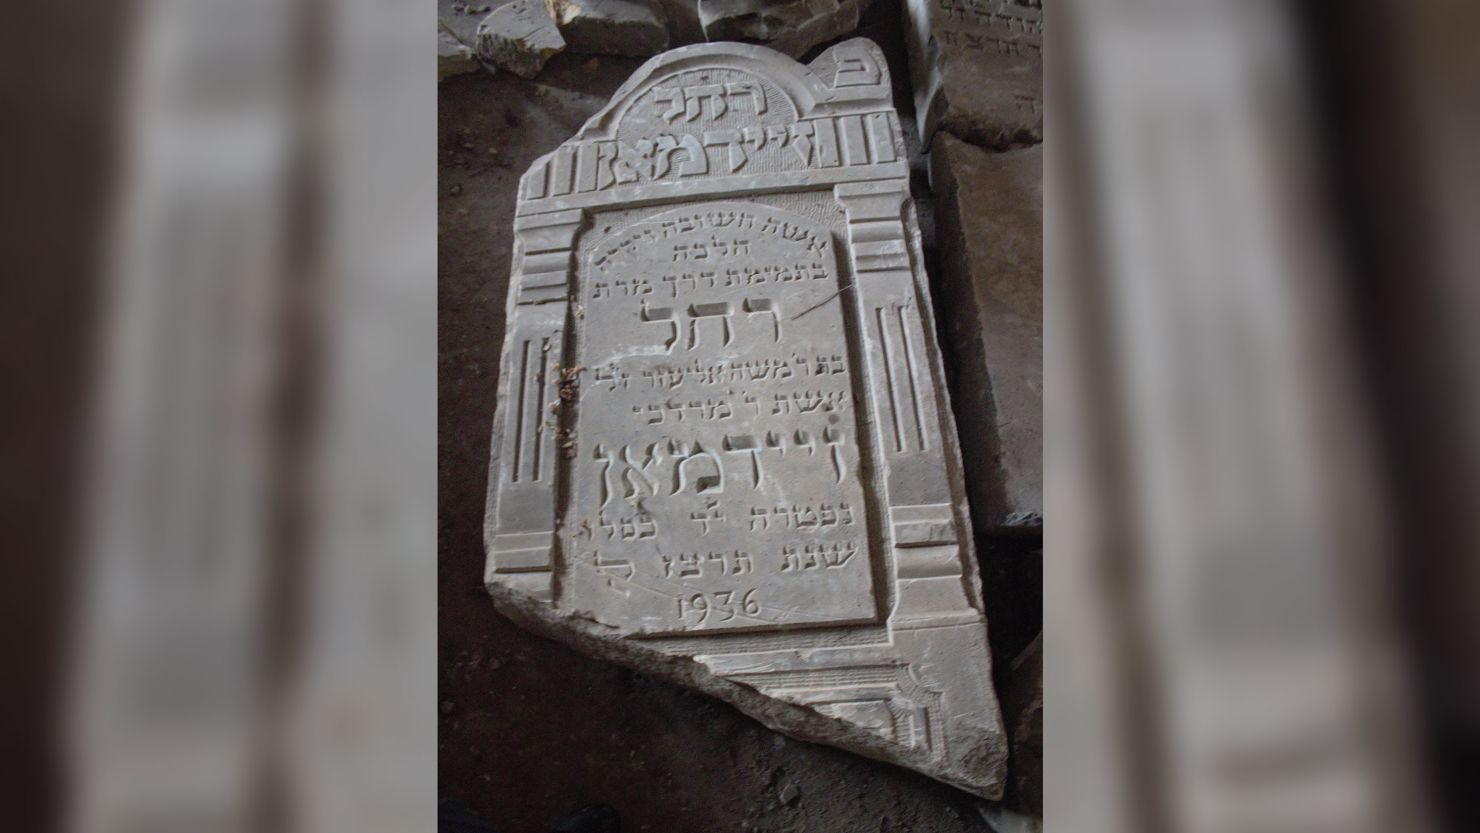 One of the headstones to have emerged in recent years, following the destruction of the Jewish cemetery in Brest last century.